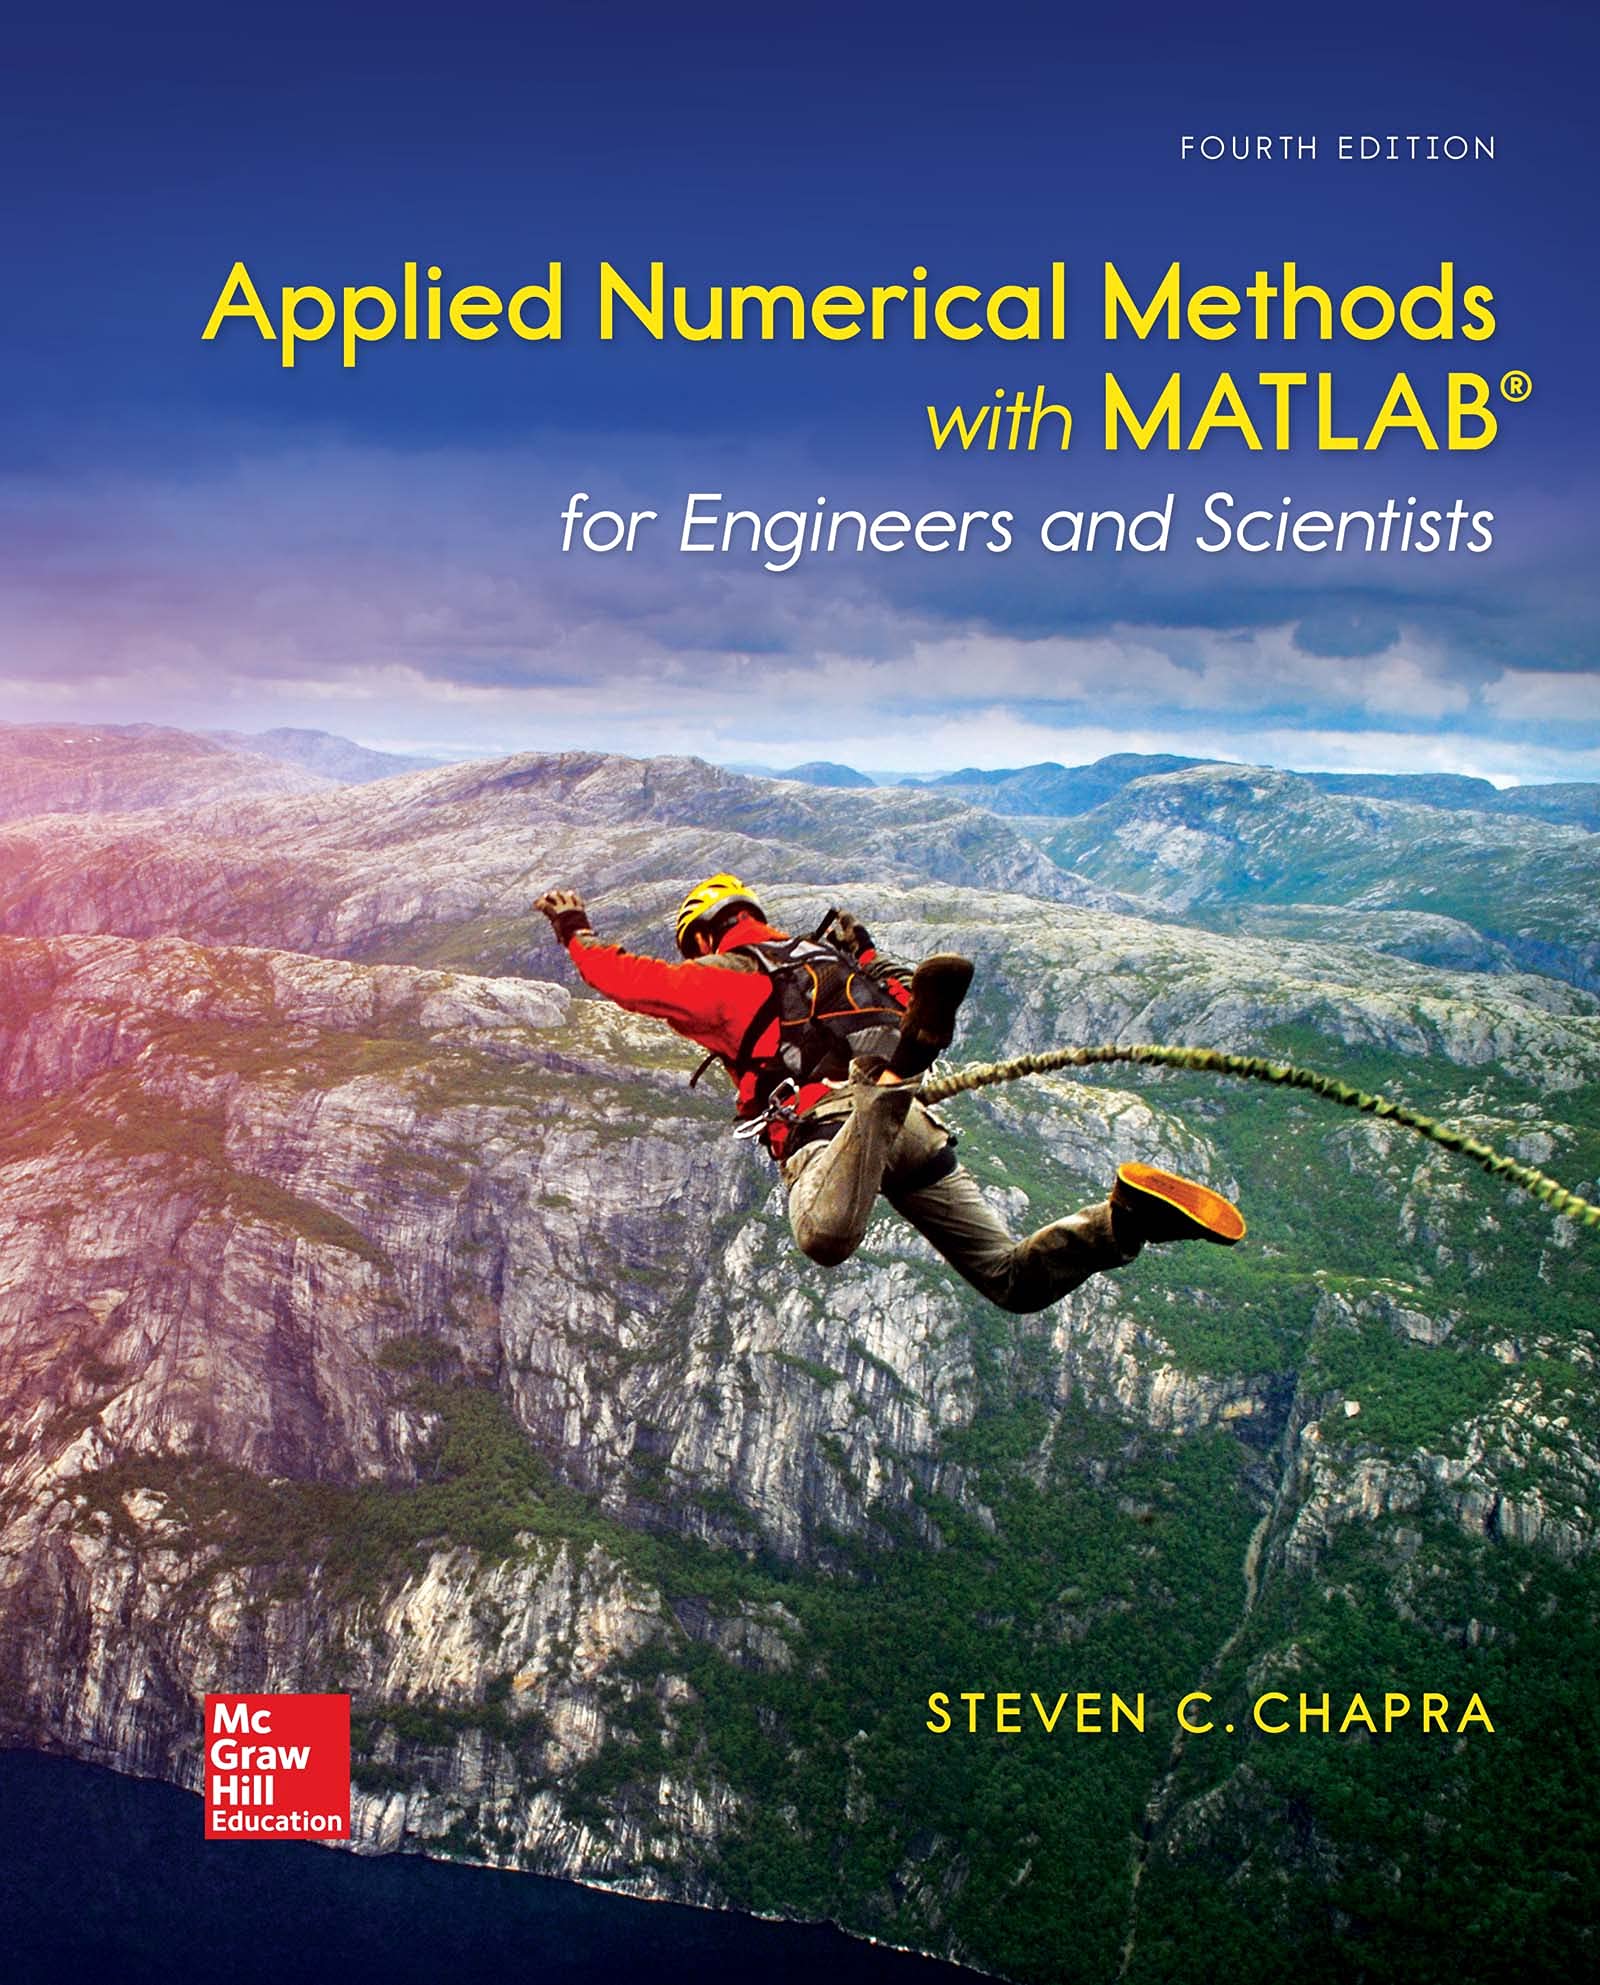 Applied numerical methods with MATLAB® for engineers and scientists